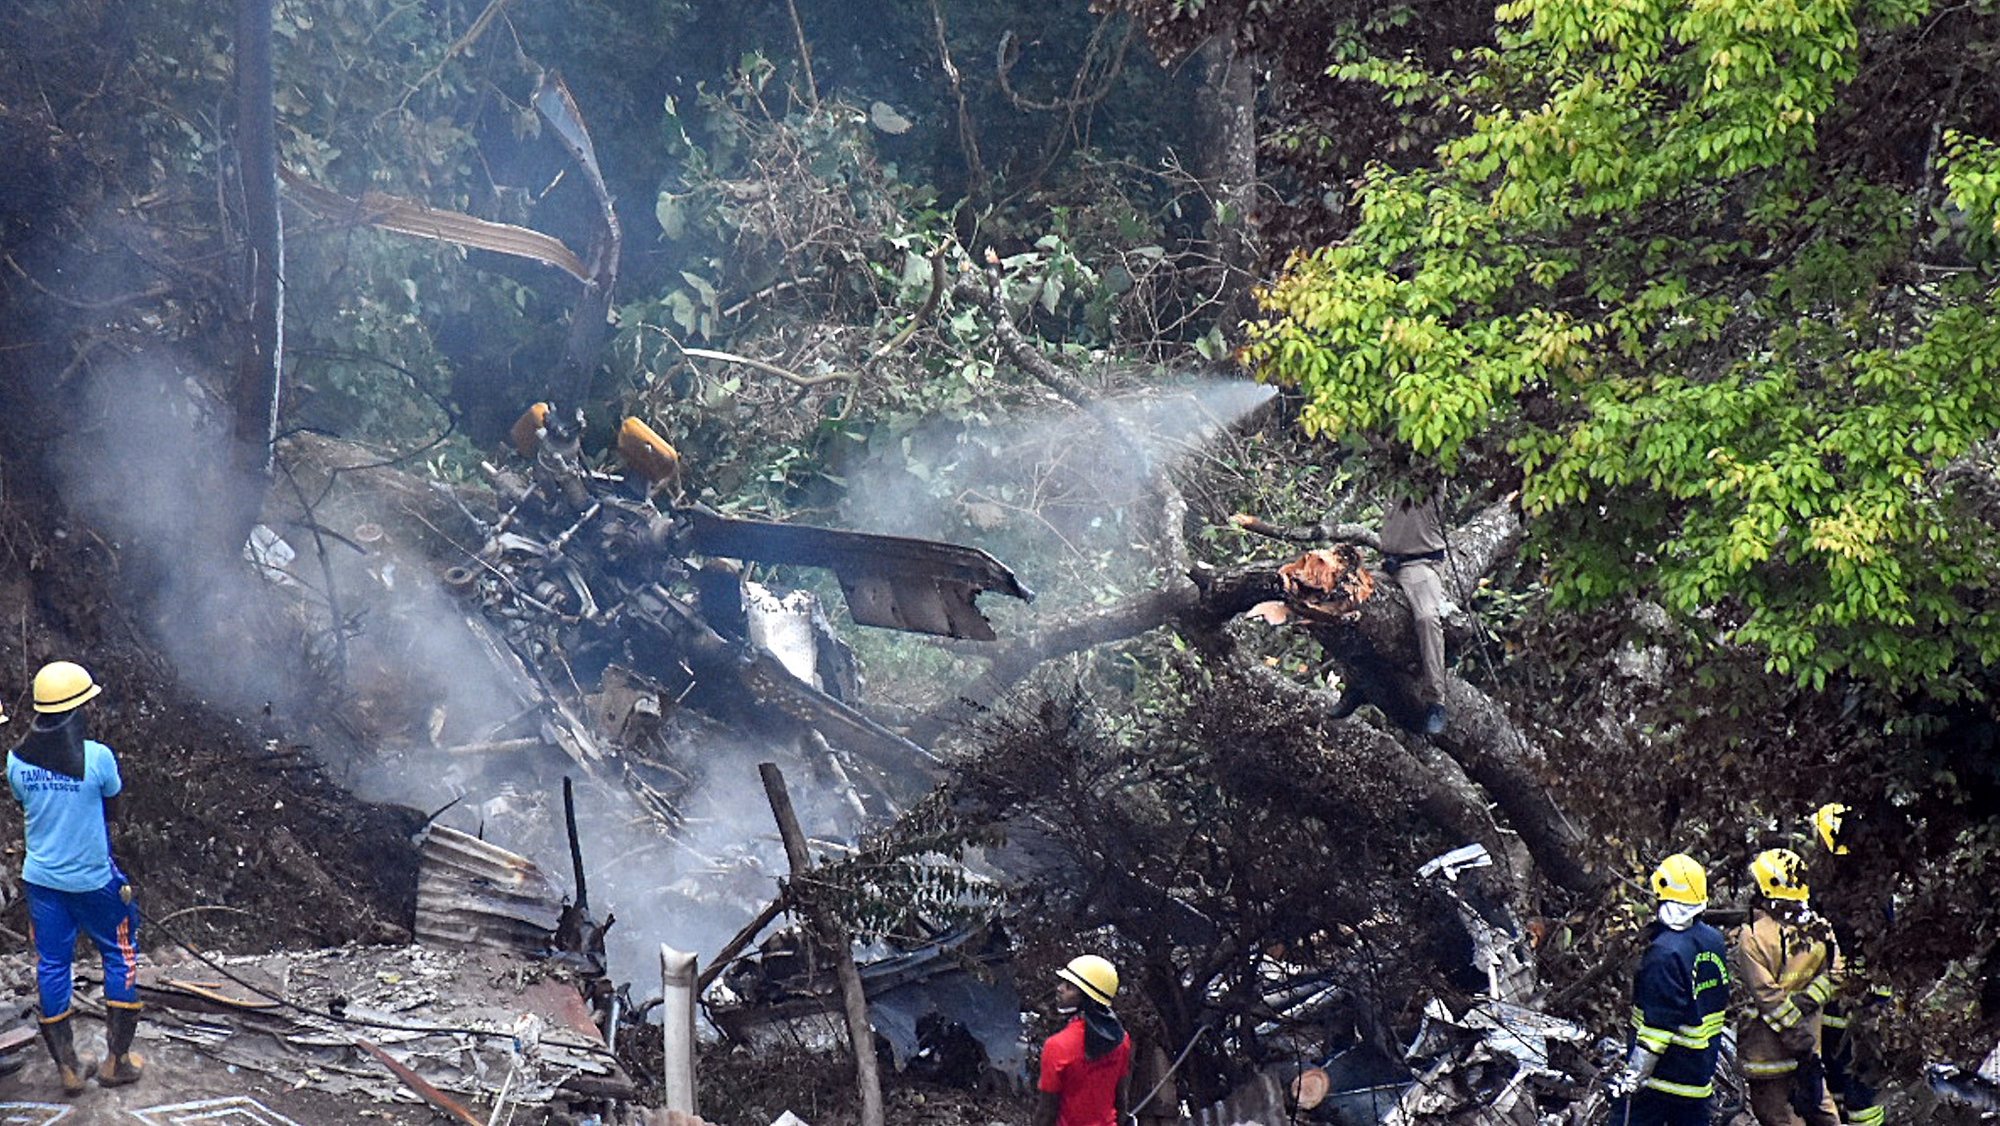 epa09629502 Rescuers work at the crash site after a Mi-17 helicopter carrying chief of defence staff Bipin Rawat and 13 others crashed near Coonoor, Tamil Nadu, India, 08 December 2021. According to the Indian air force statement Gen Bipin Rawat, his wife Madhulika Rawat and 11 others on board have died in the unfortunate accident.  EPA/SHILJA JOSEPH